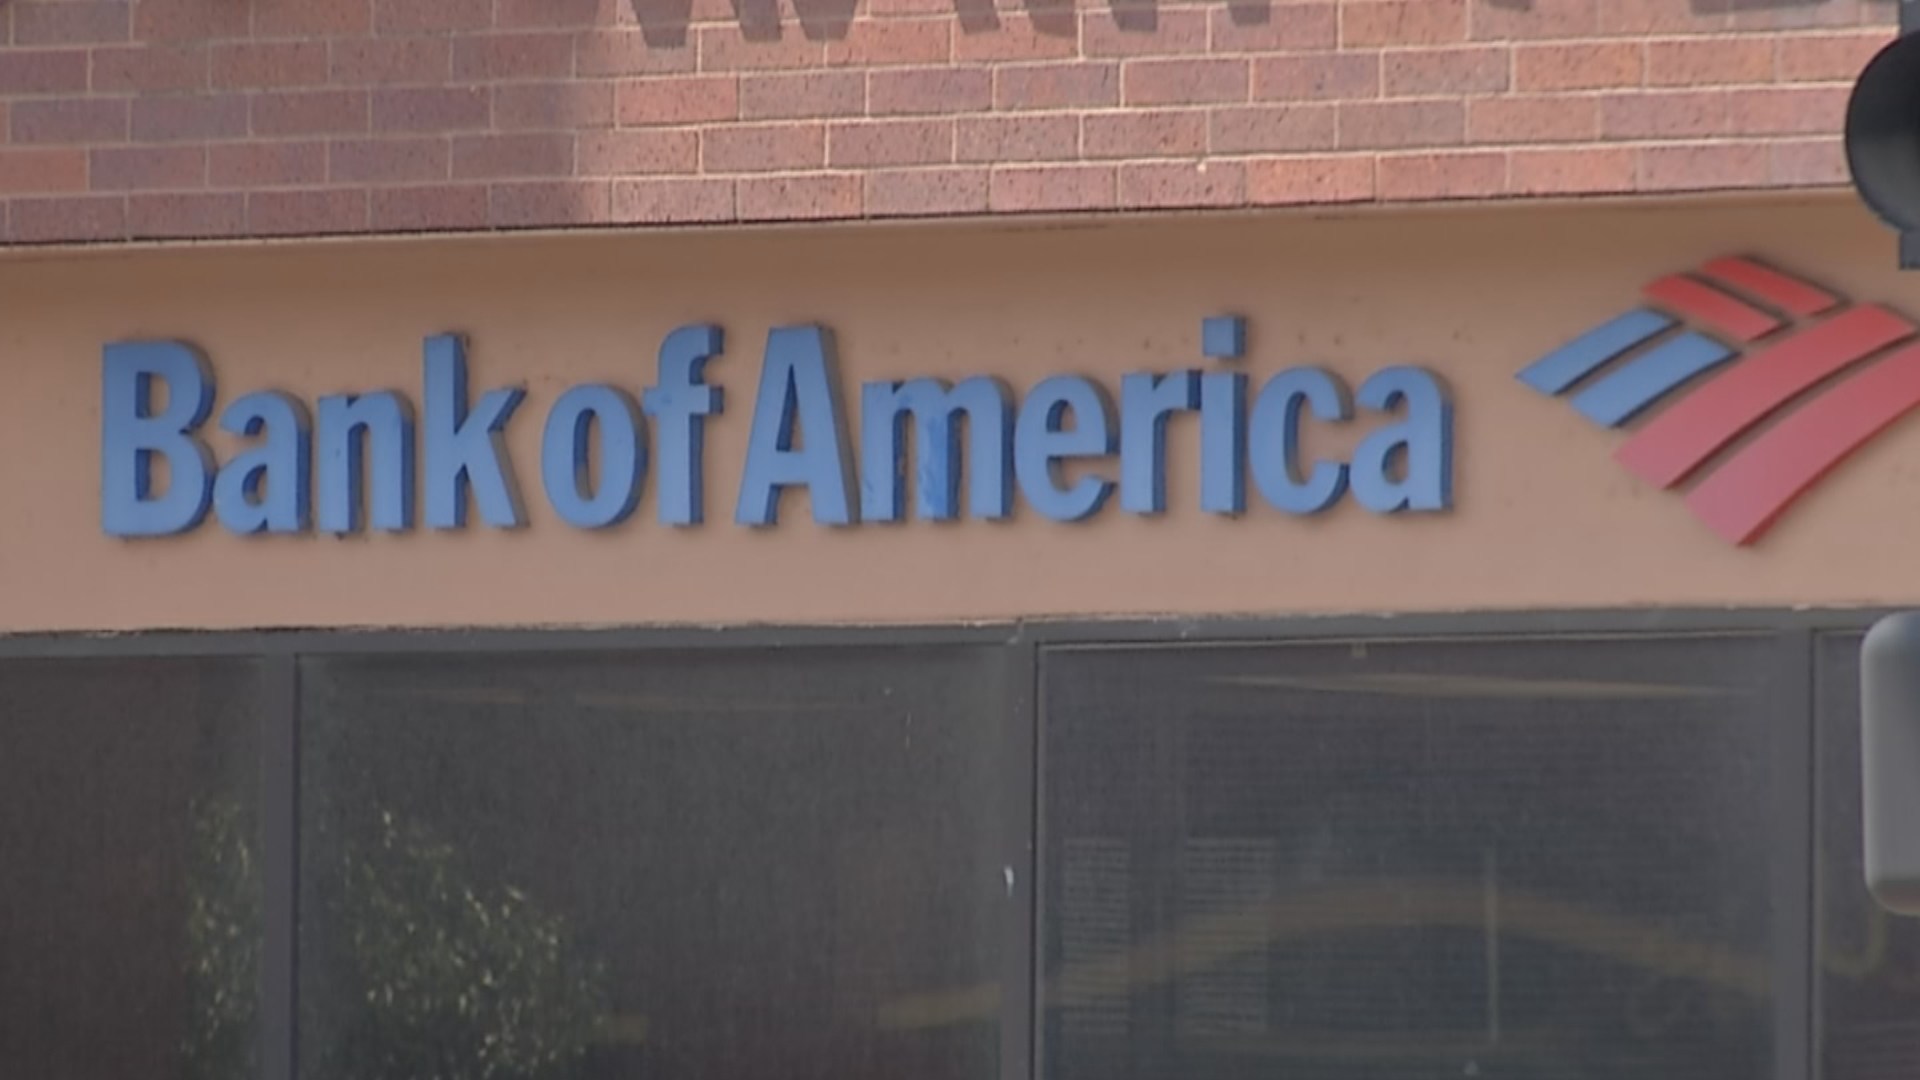 Bank of America customers furious after accounts frozen without warning